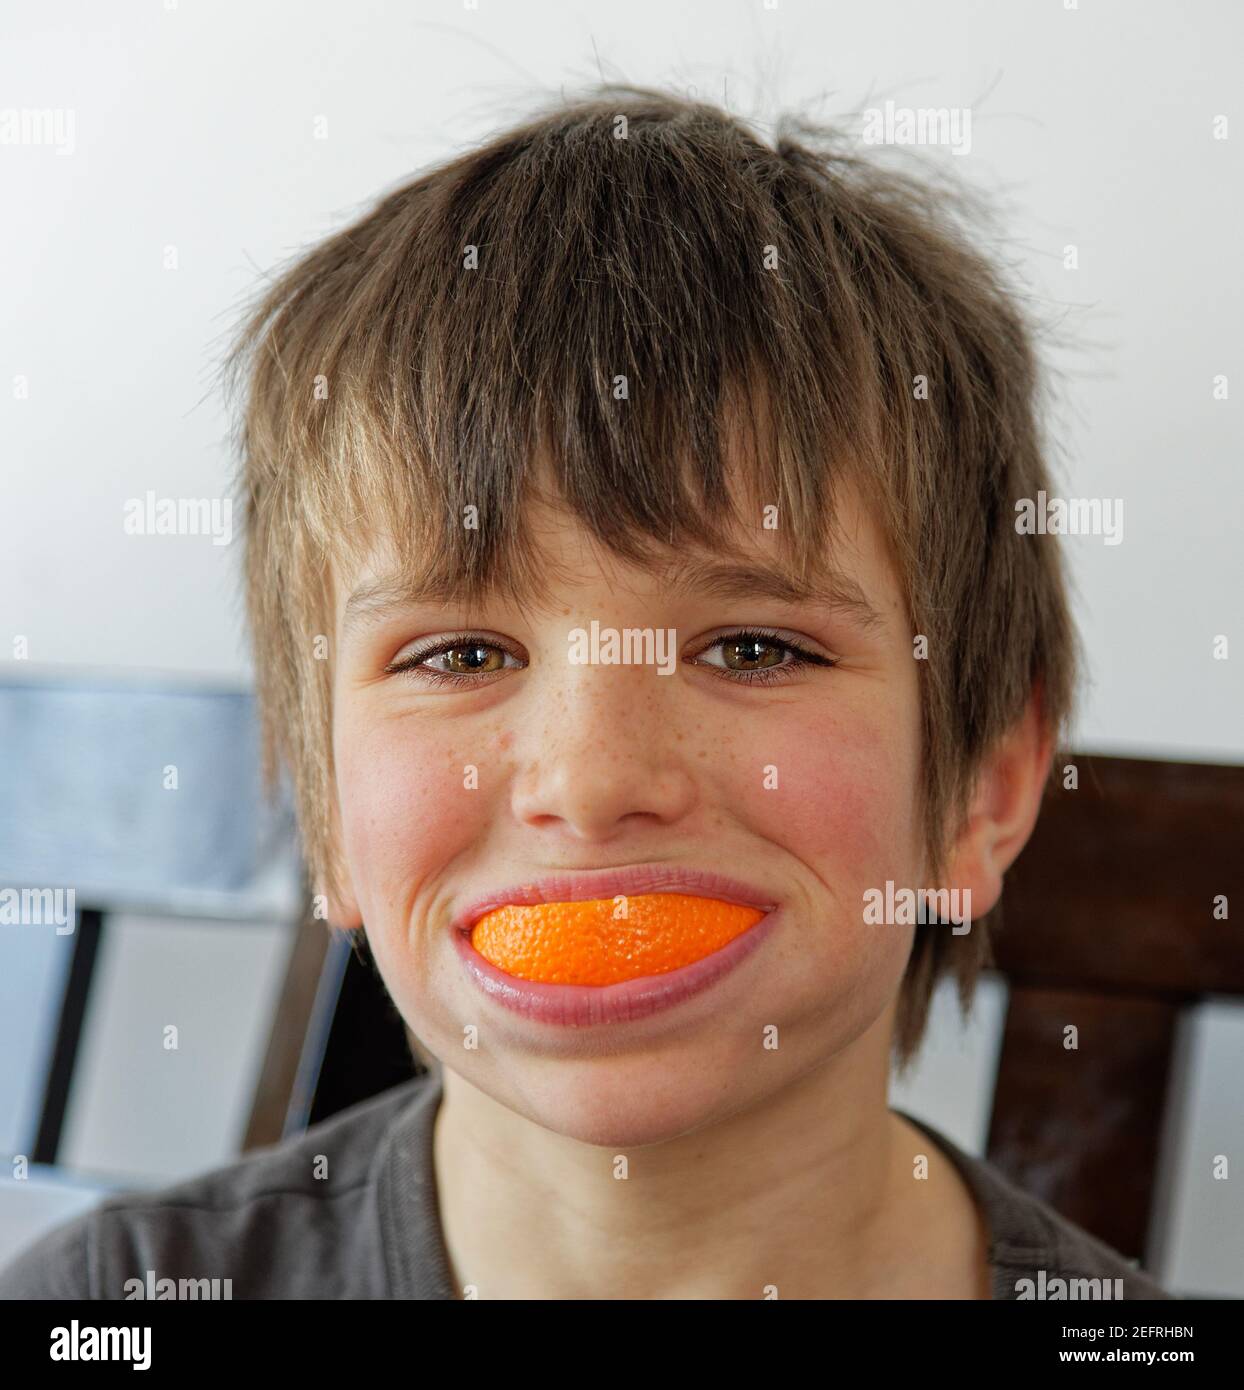 A Young Boy 8 Yr Old With An Orange Peel Smile Stock Photo Alamy